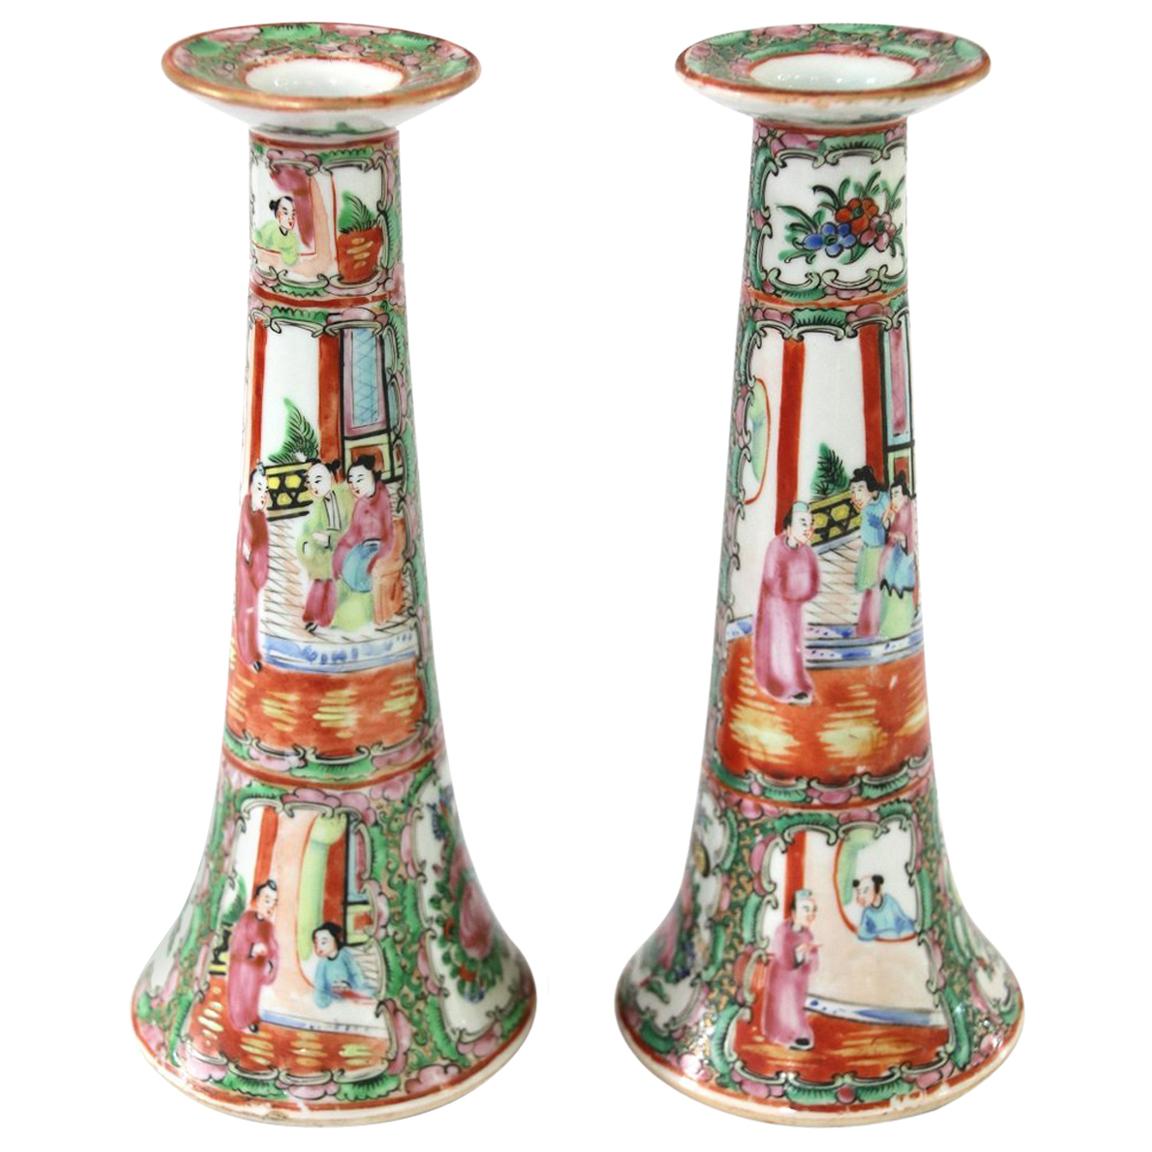 Late 19th Century Chinese Rose Medallion Near-Pair of Candlesticks